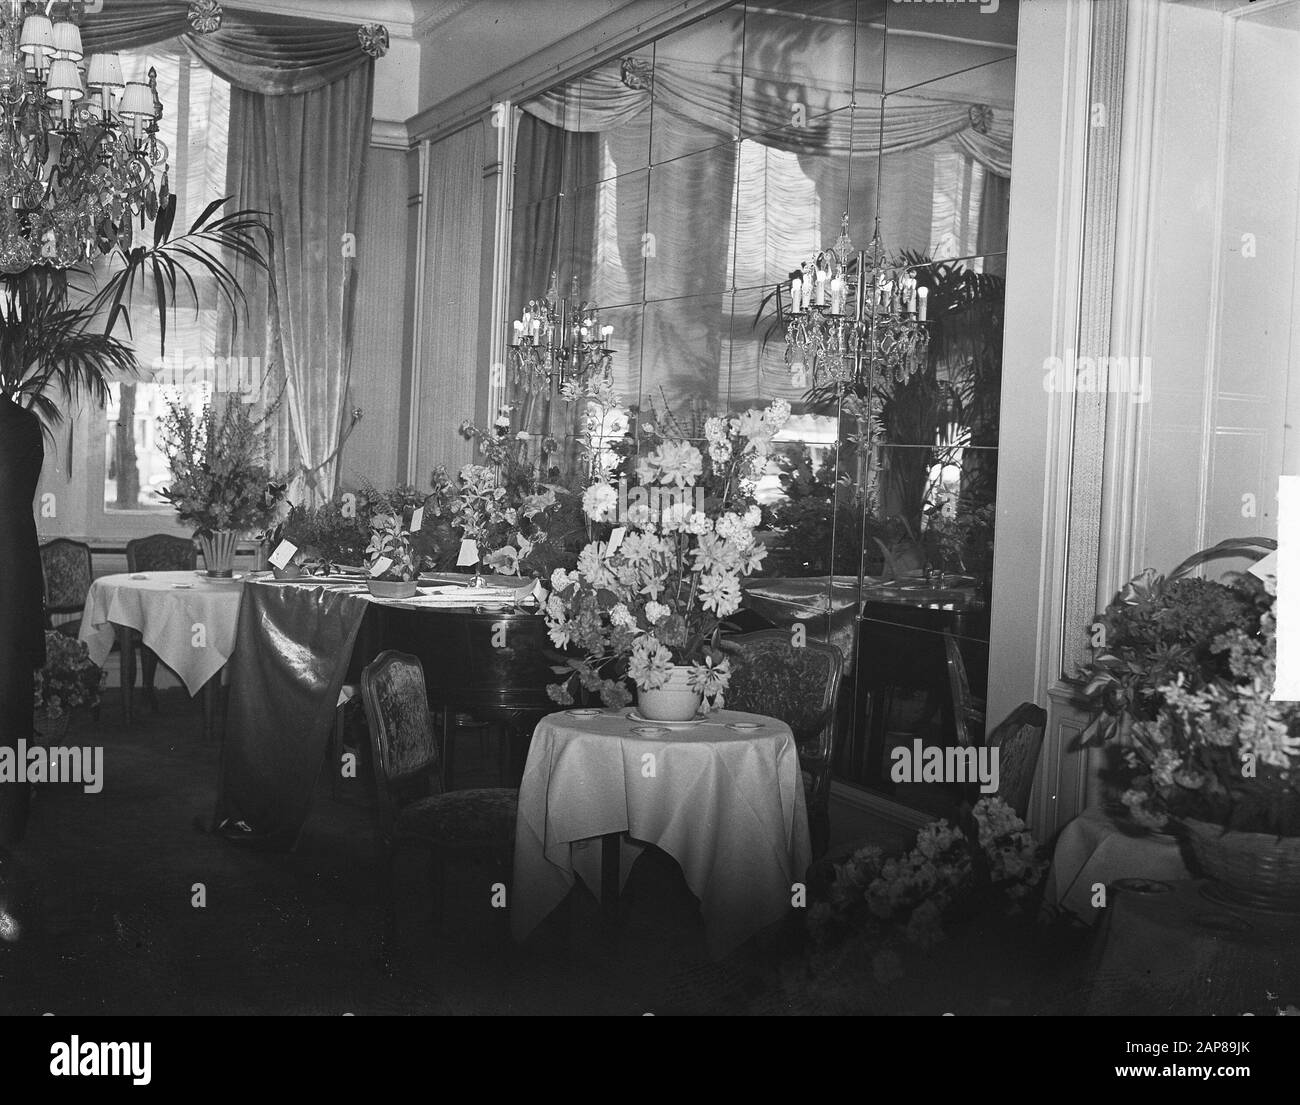 American Express reception flowers Date: March 18, 1950 Keywords: FLOWERS, receptions Stock Photo